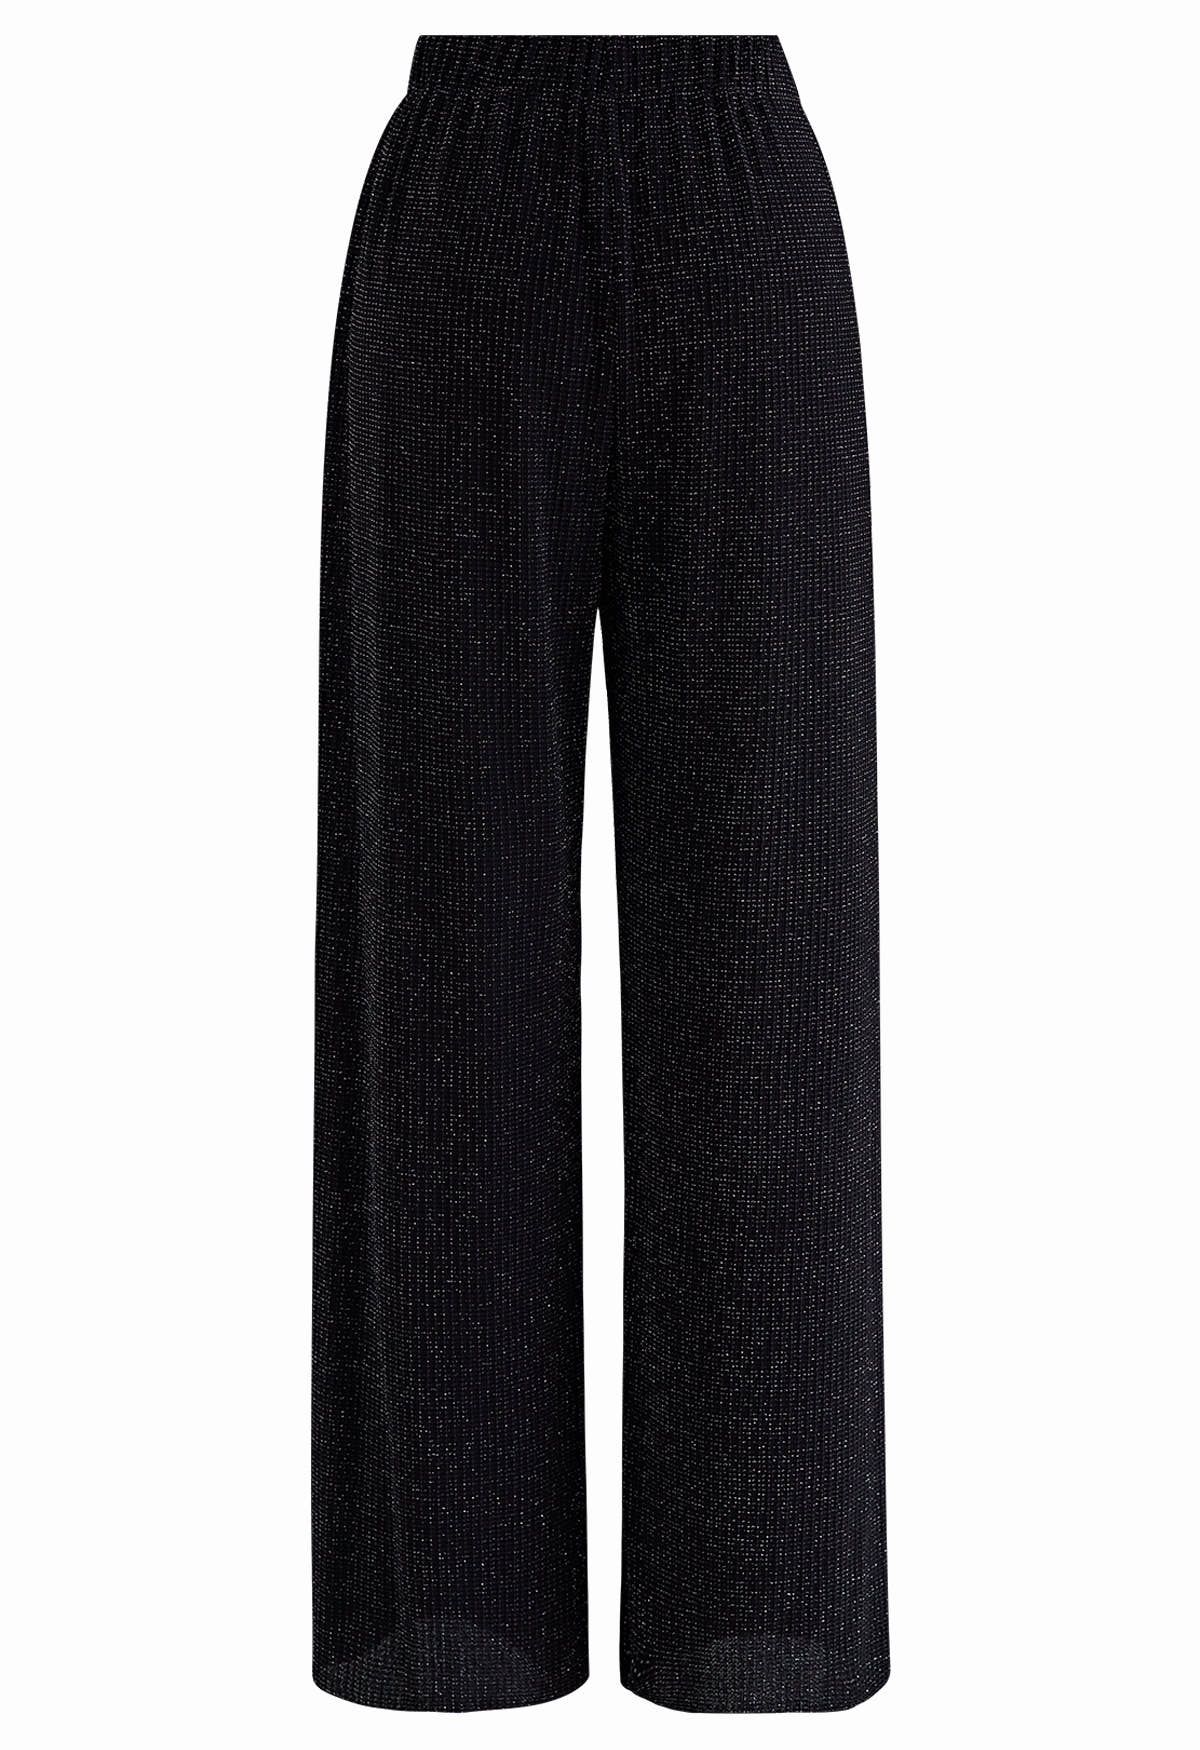 Midnight Shimmer Black Straight-Leg Pants - Retro, Indie and Unique Fashion